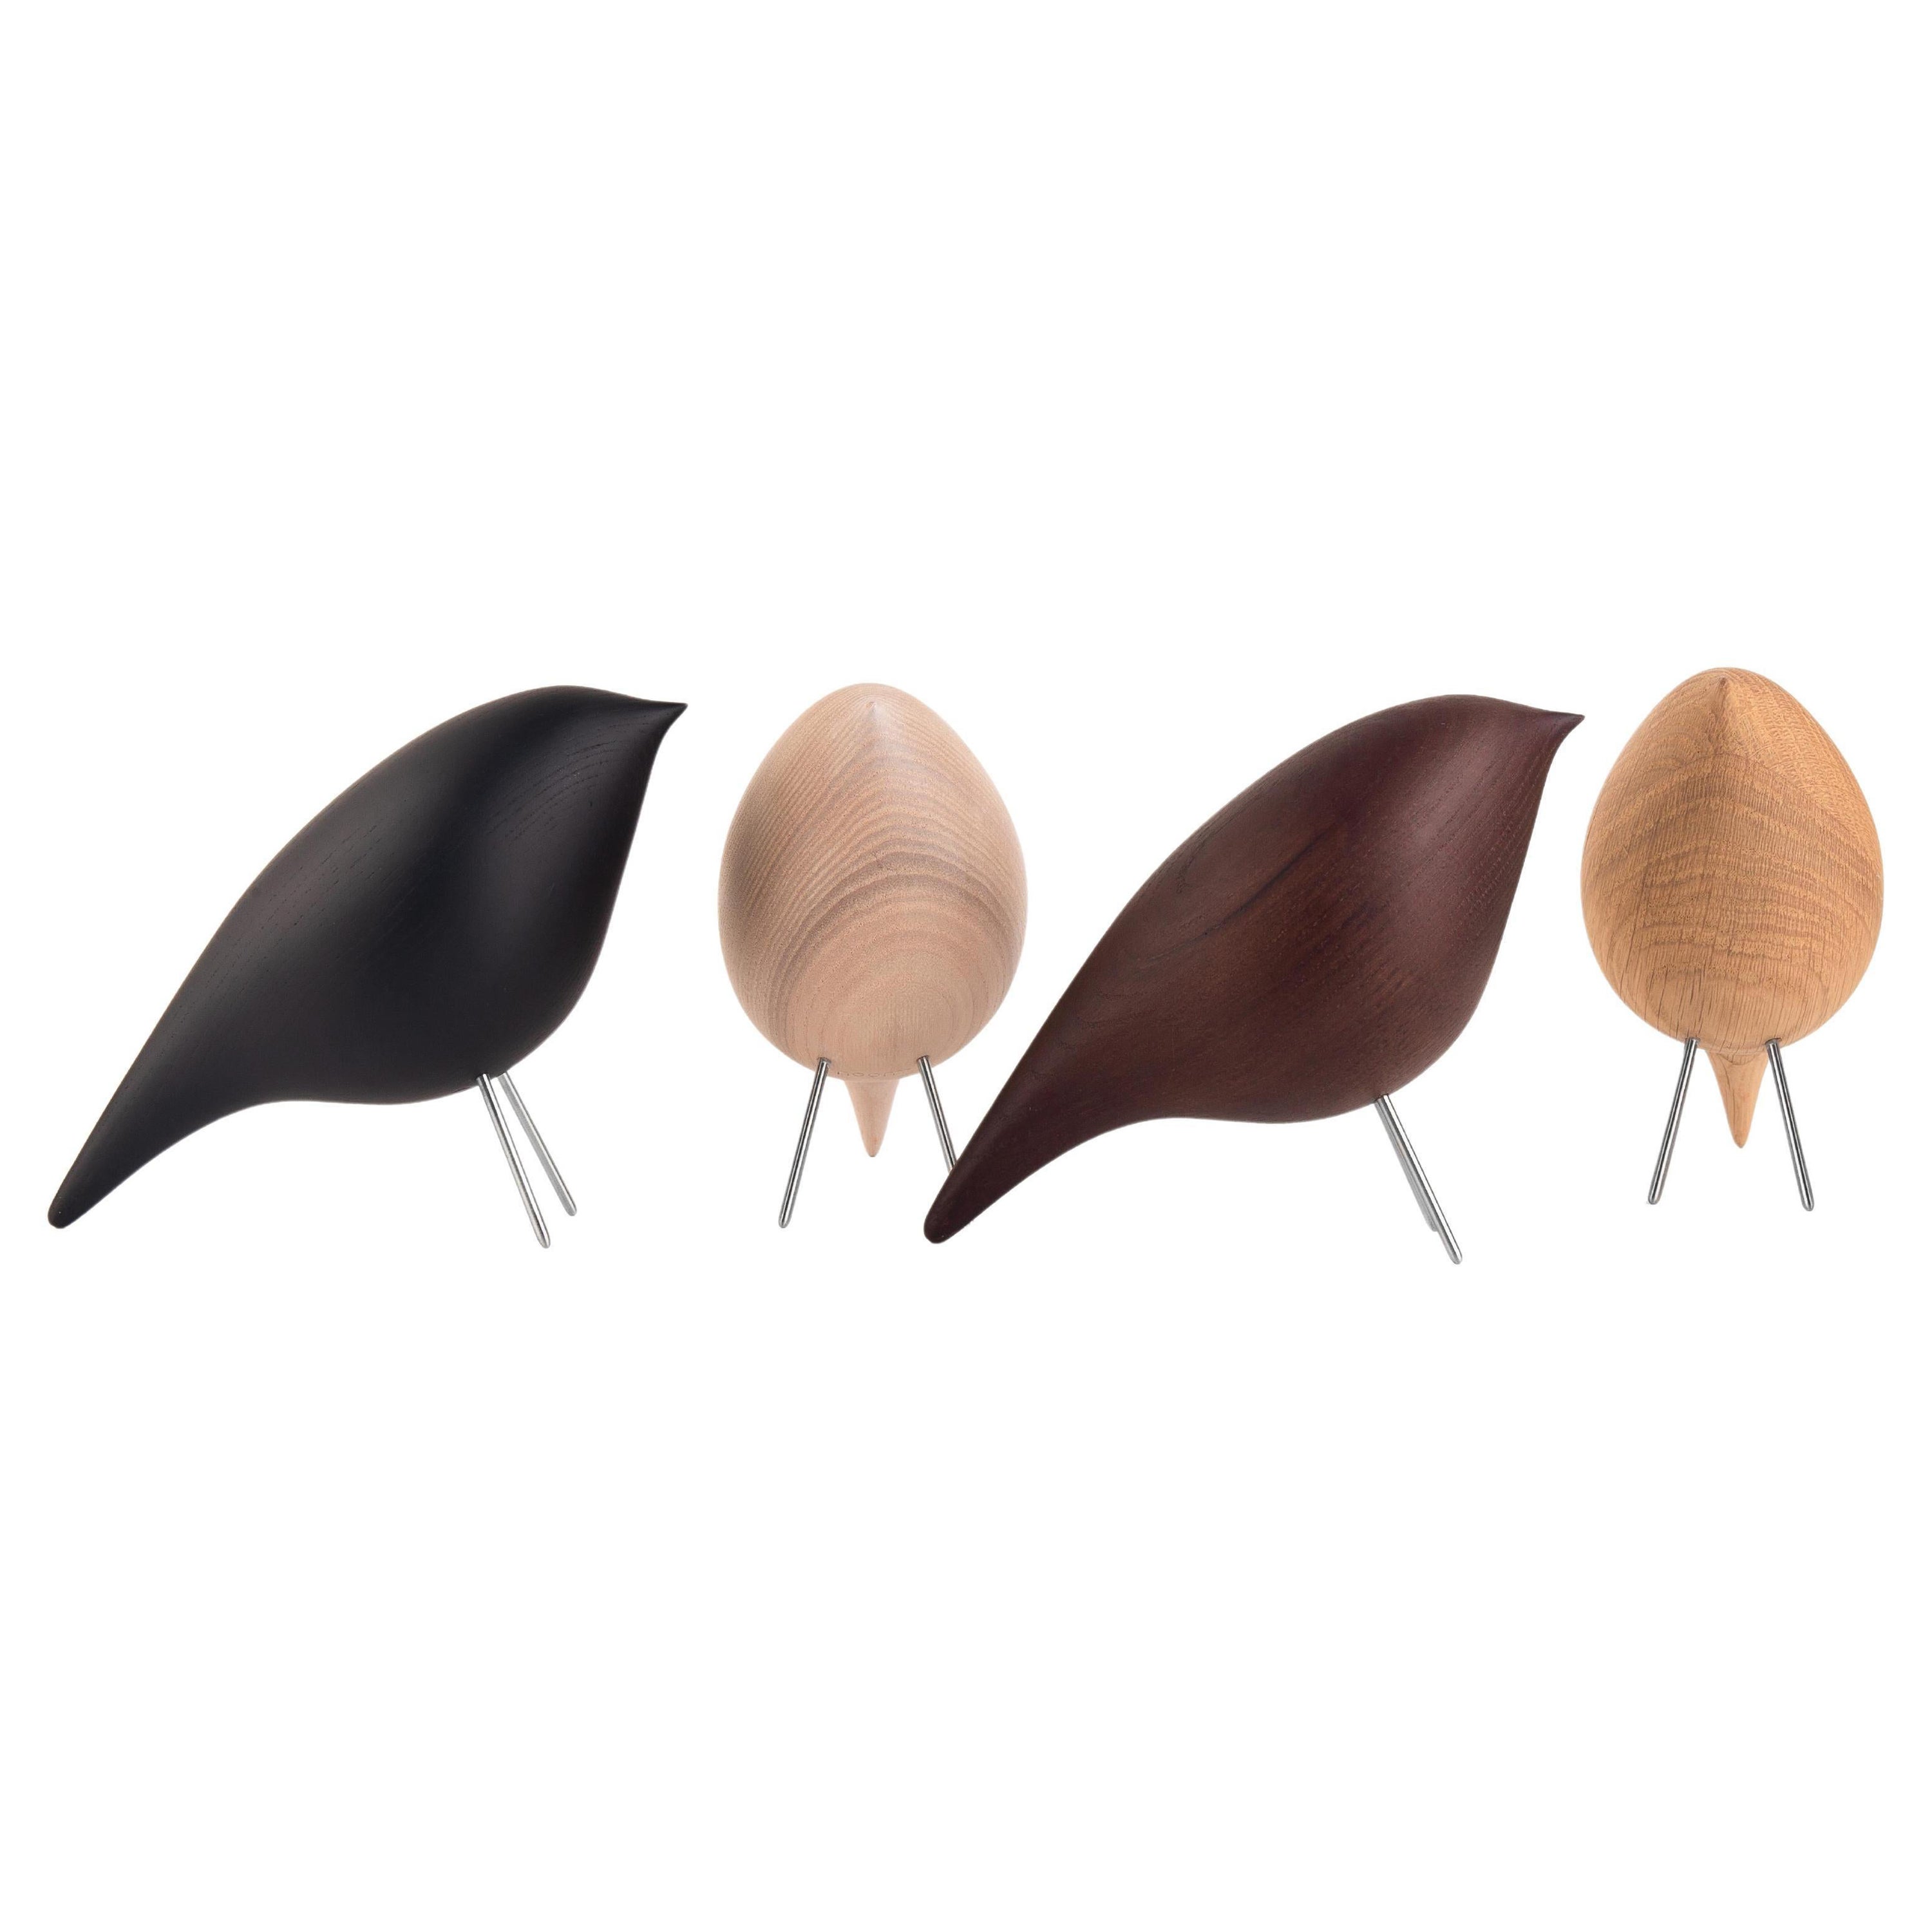 Contemporary Set of 4 Tweety Decorative Birds by Noom, All finishes 